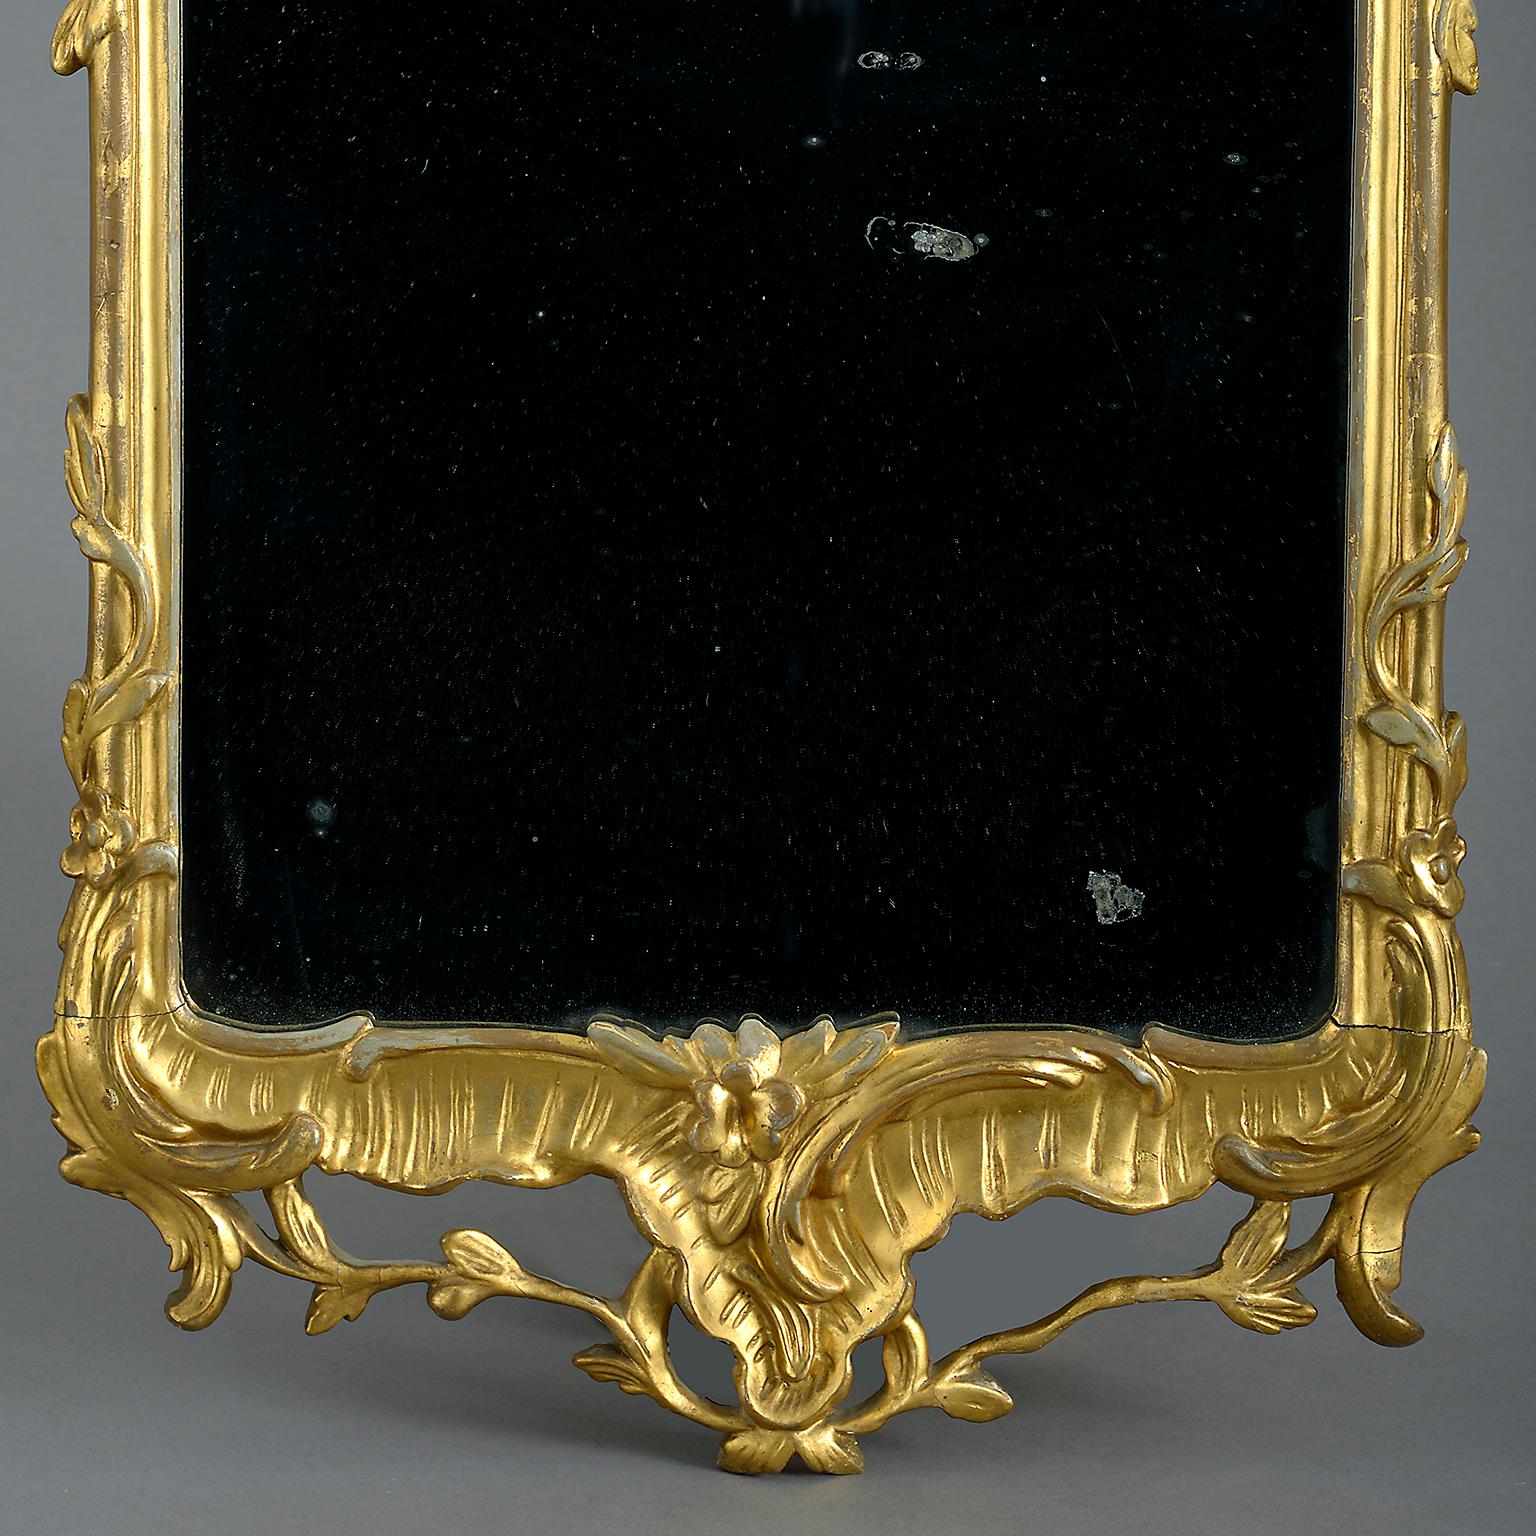 German Mid-18th Century Rococo Giltwood Mirror in the Manner of Hoppenhaupt